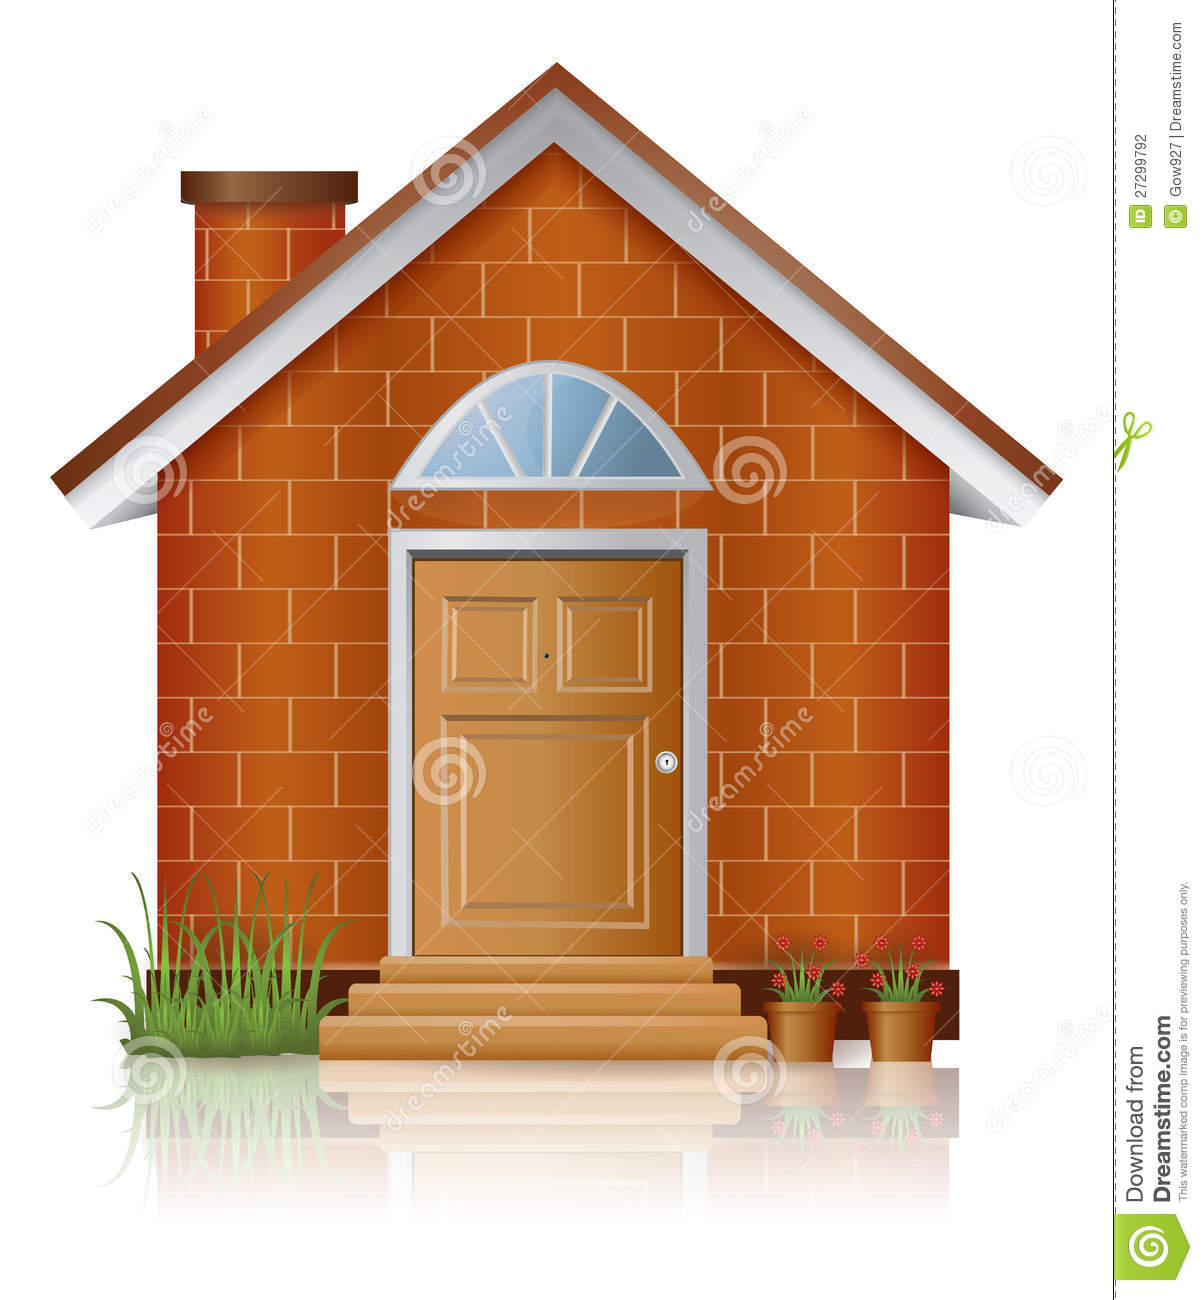 Brick House Architecture With Chimney Create By Vector